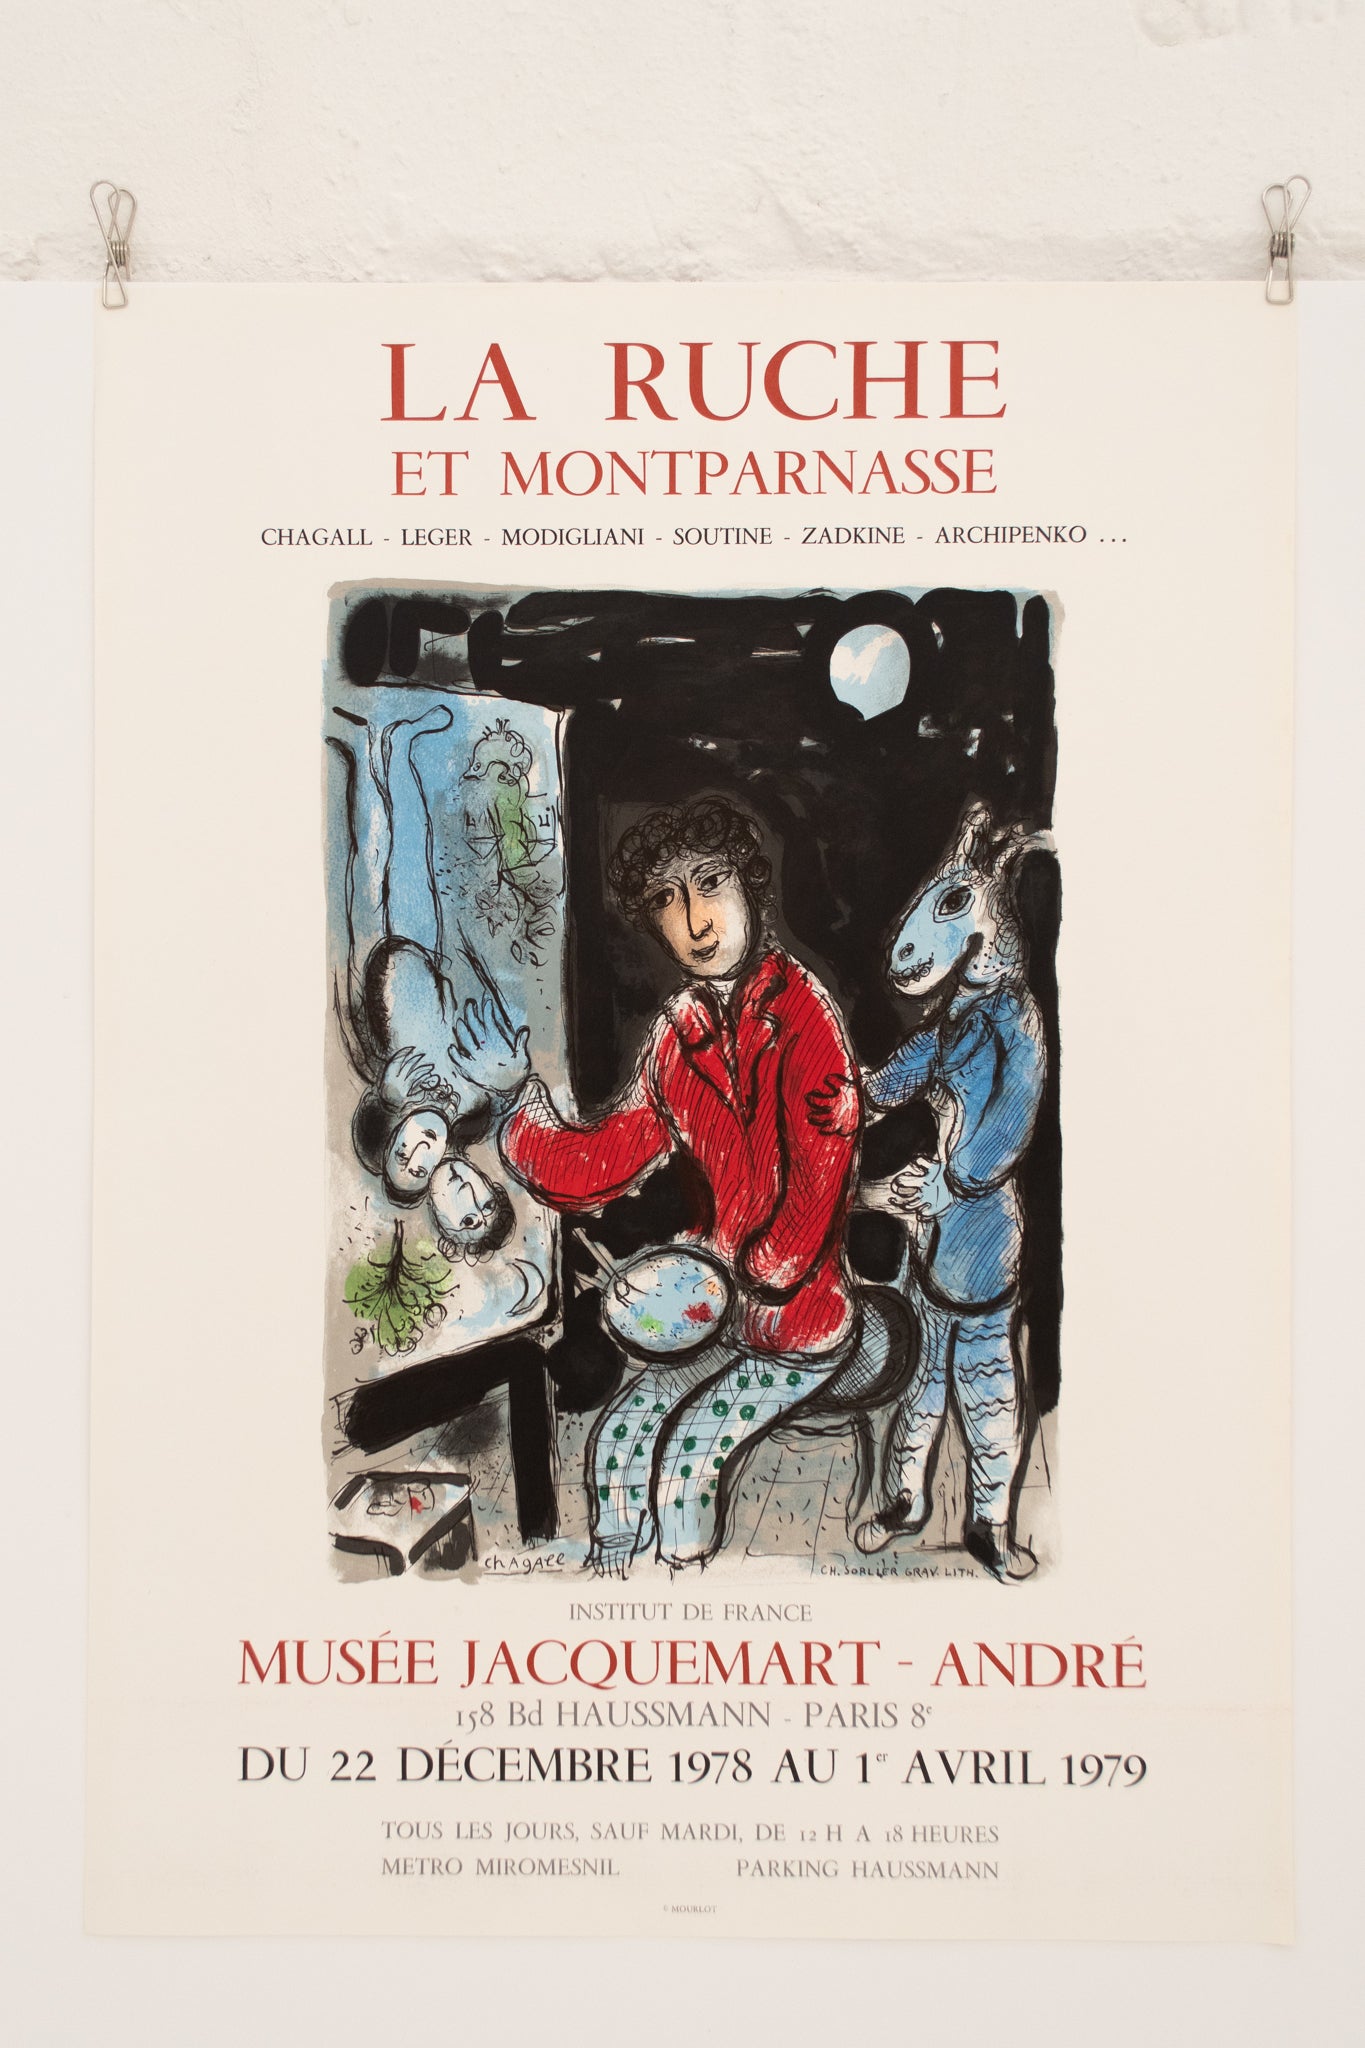 Marc Chagall Musee Jacquemart-Andre 1978-79 Lithograph Print